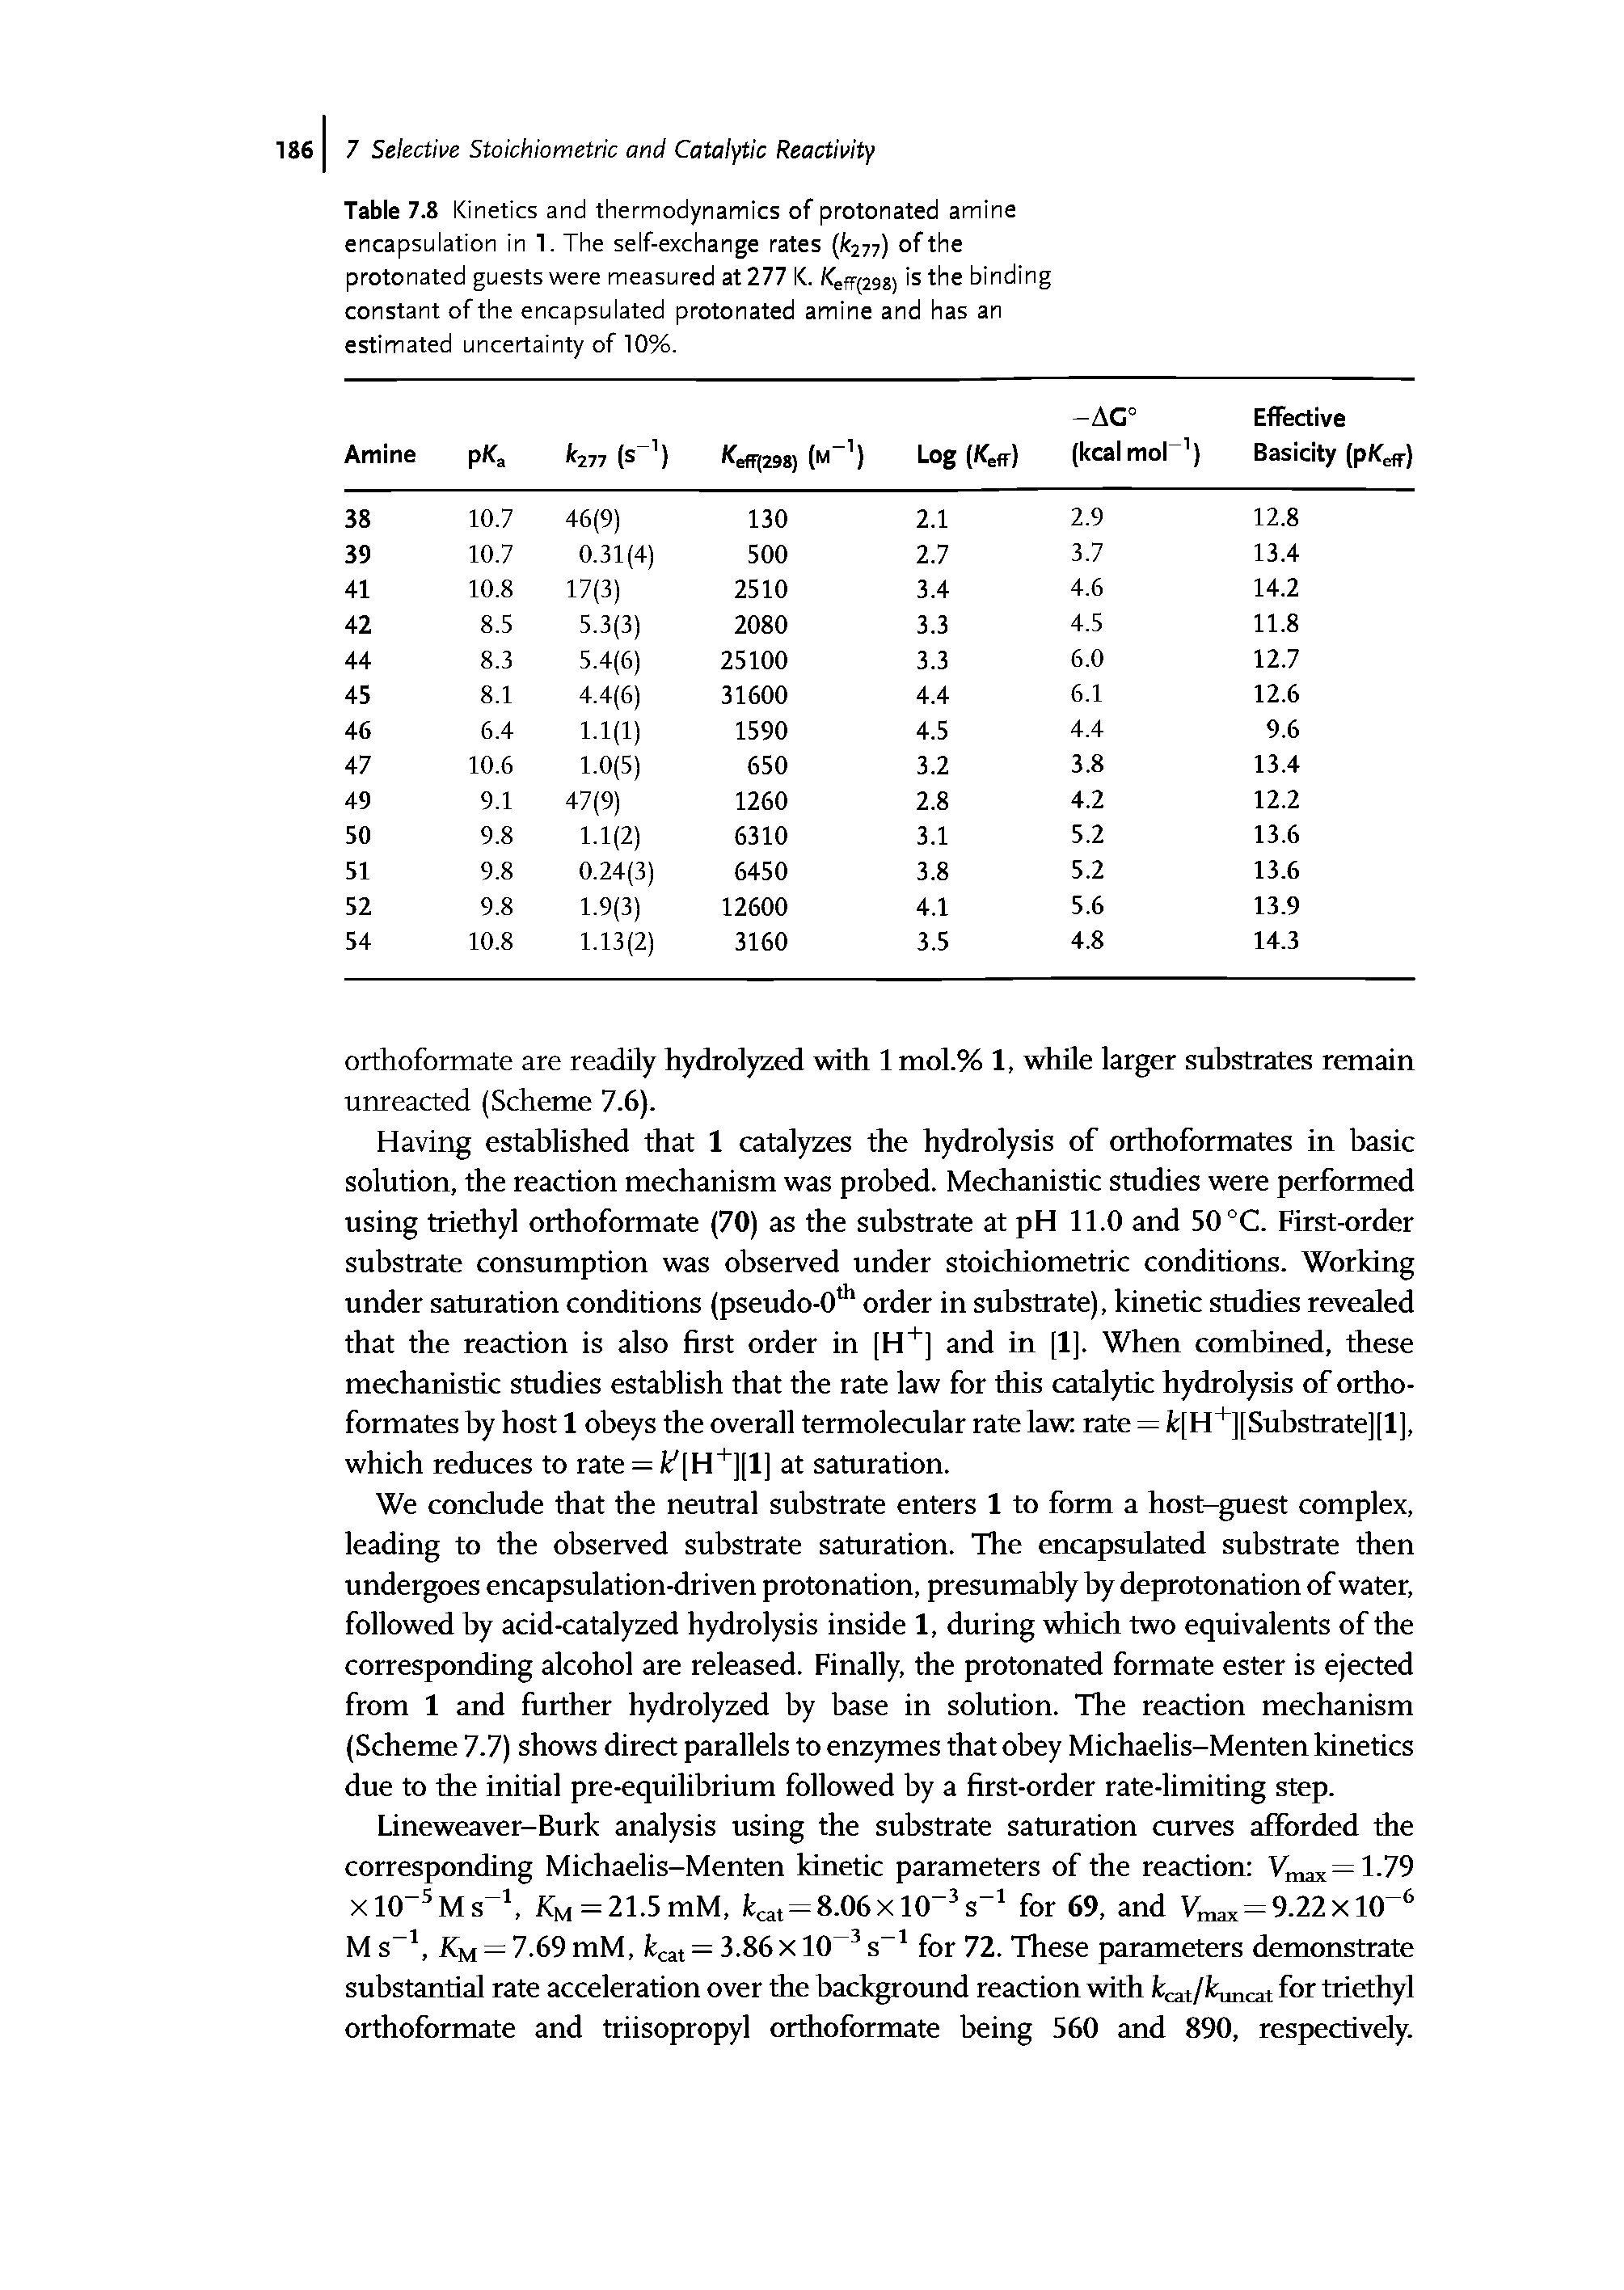 Table 7.8 Kinetics and thermodynamics of protonated amine encapsulation in 1. The self-exchange rates ( 277) ofthe protonated guests were measured at 277 K. /< eff(298) is the binding constant of the encapsulated protonated amine and has an estimated uncertainty of 10%.